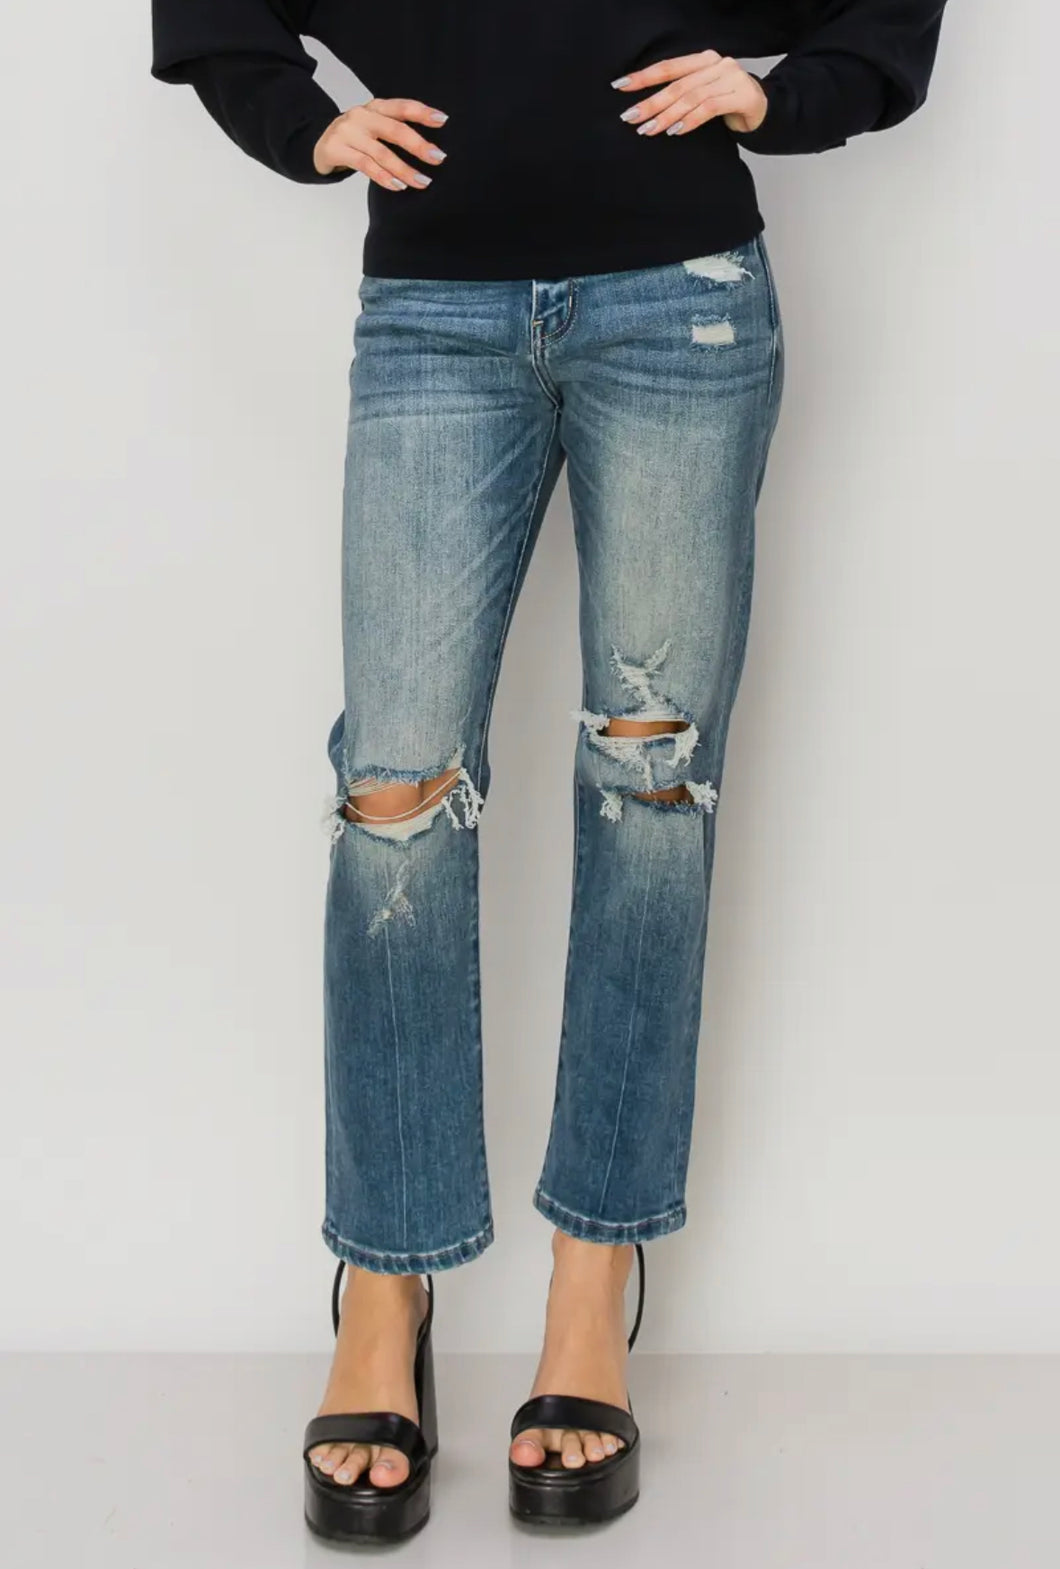 Mid Rise Ankle Length Distressed Skinny Jean